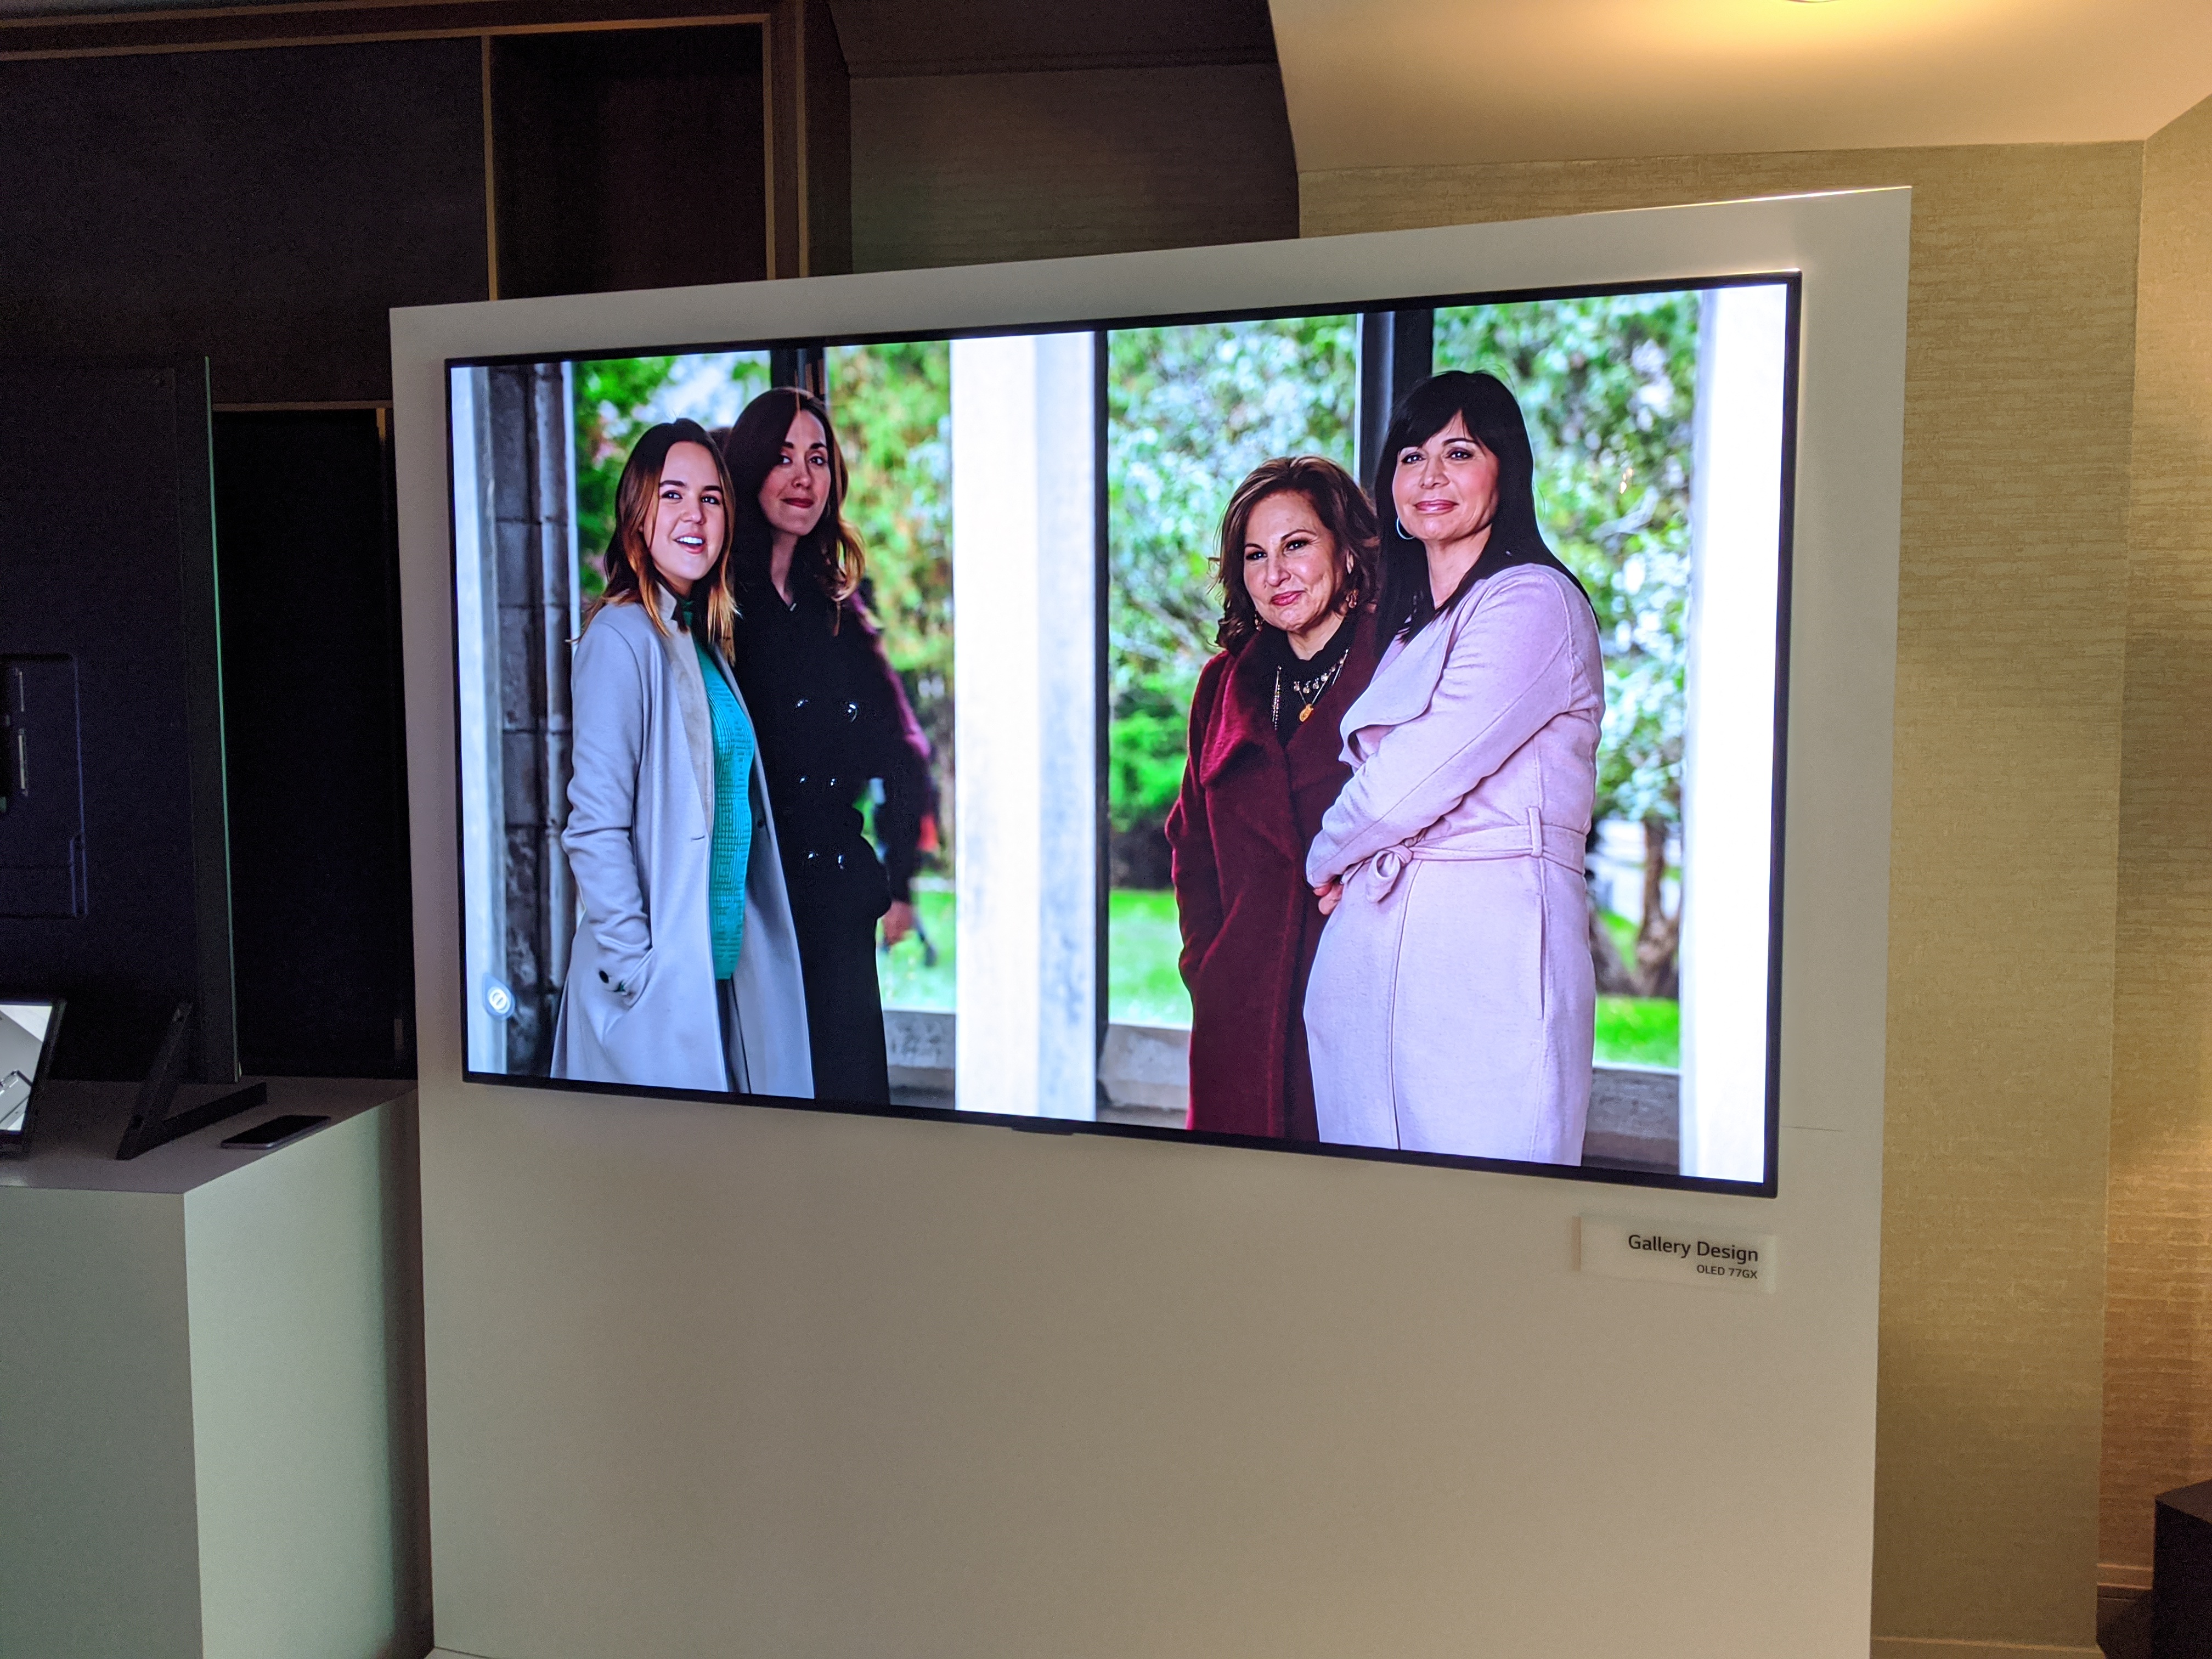 Hands on: LG Gallery OLED TV review | Tom's Guide